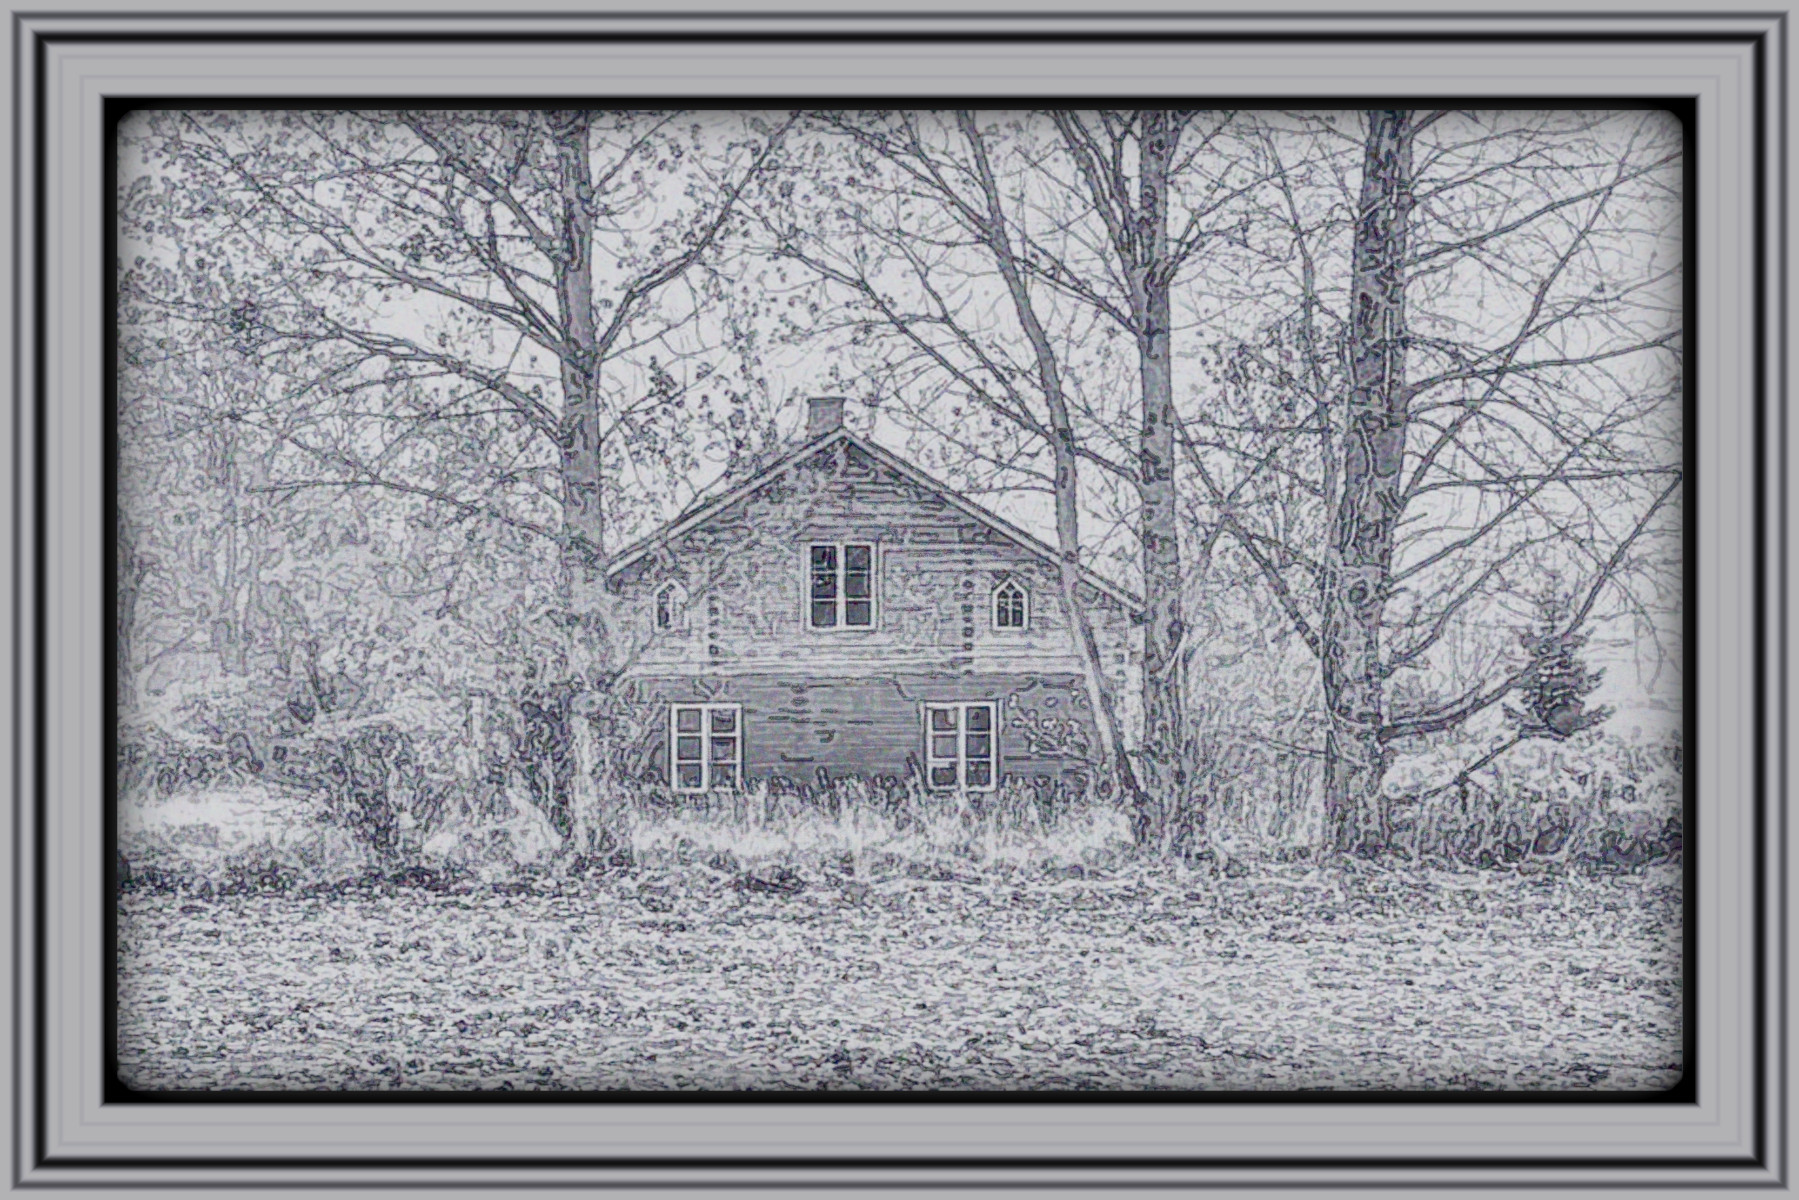 2024-03-27 09-41-12 once_there_was_a_home___stock_by_ravenslane_dh4fave-414w-2x with Lines Art effect, preset=3000,35.0,3.5,Pen Drawing,0,[200,201,208],3,1.jpg